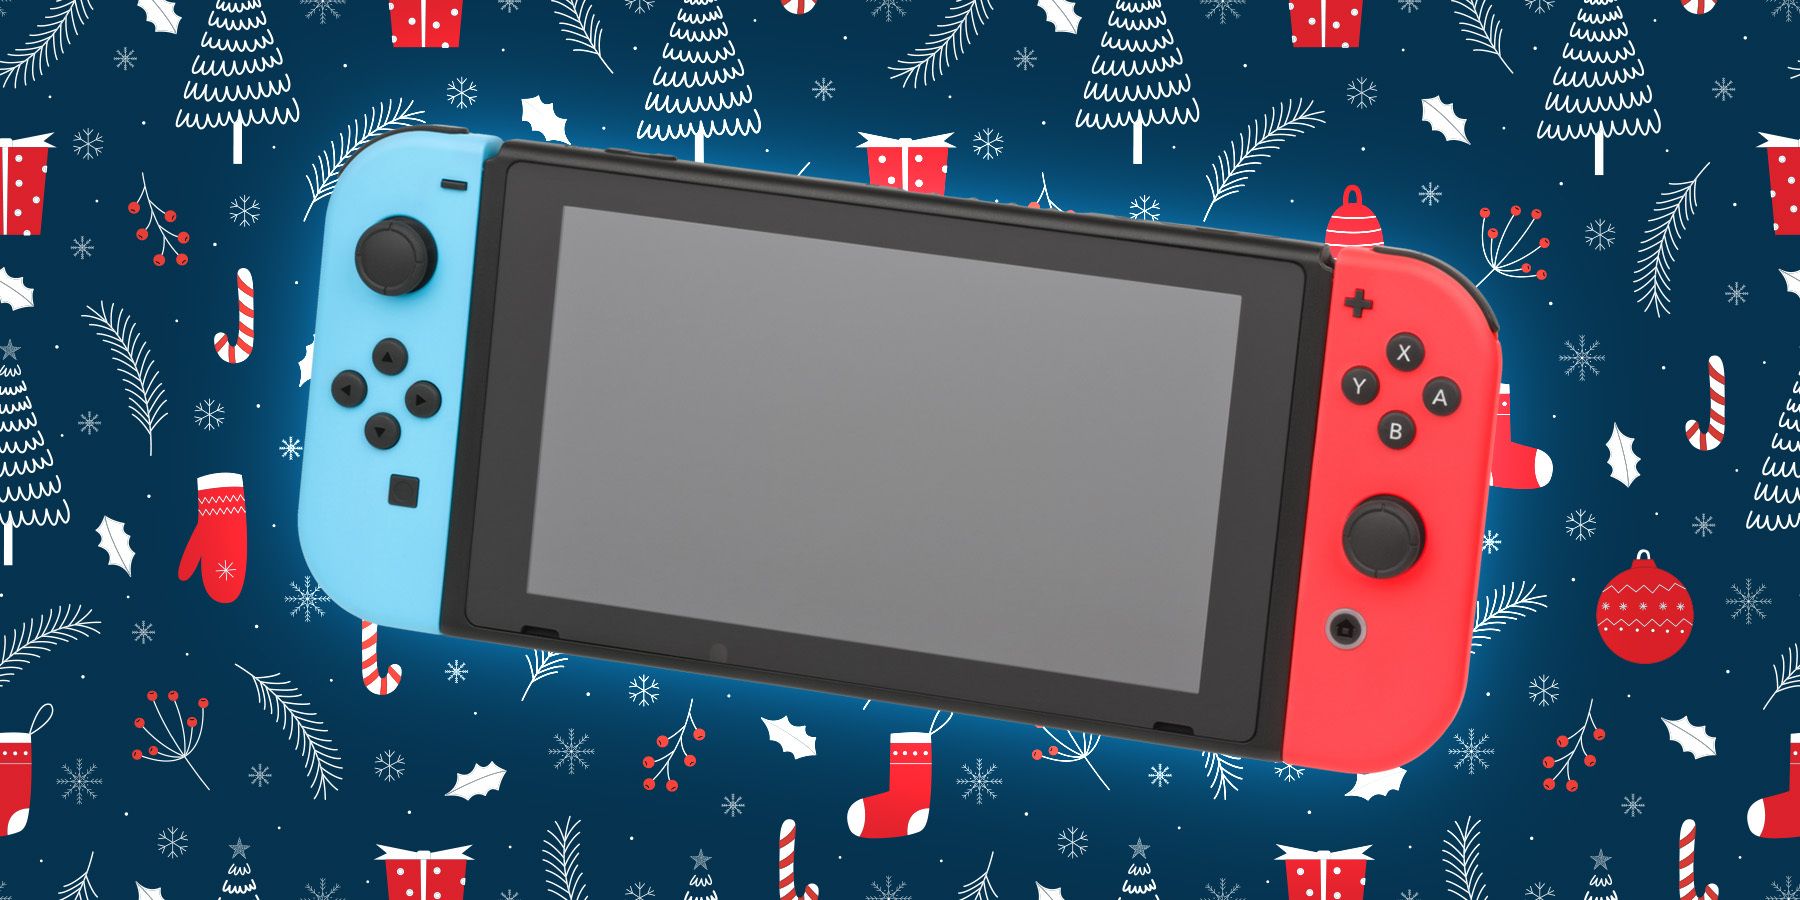 Free Switch games: How to get 11 free games for Christmas